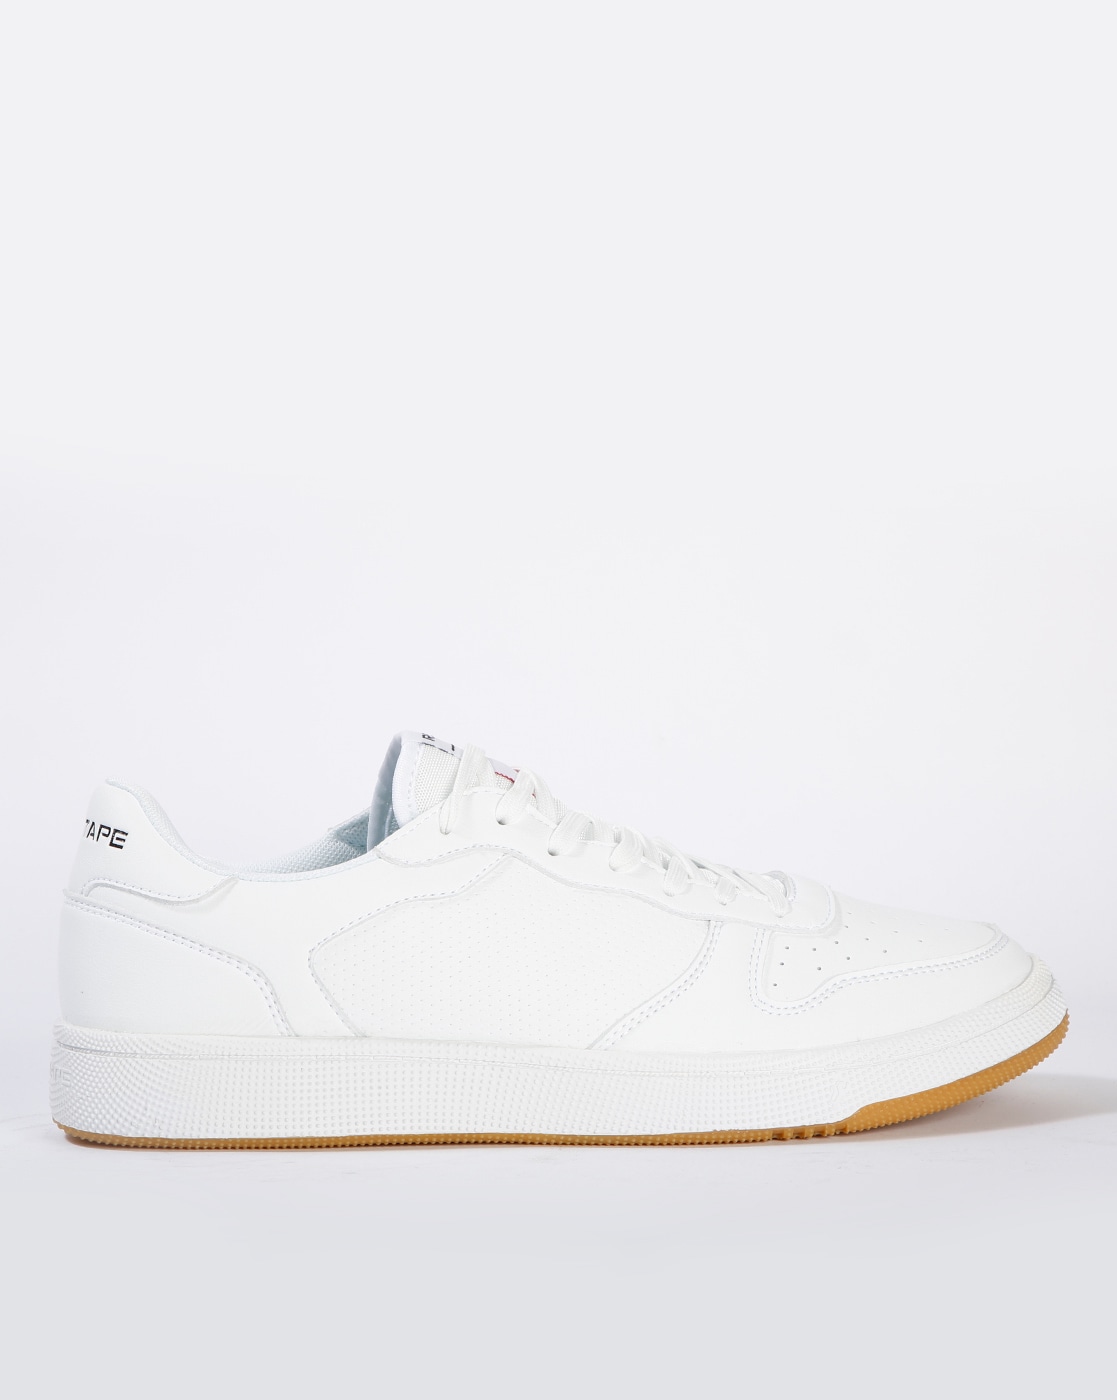 Buy Mode By Red Tape Solid White Sneakers Online-baongoctrading.com.vn